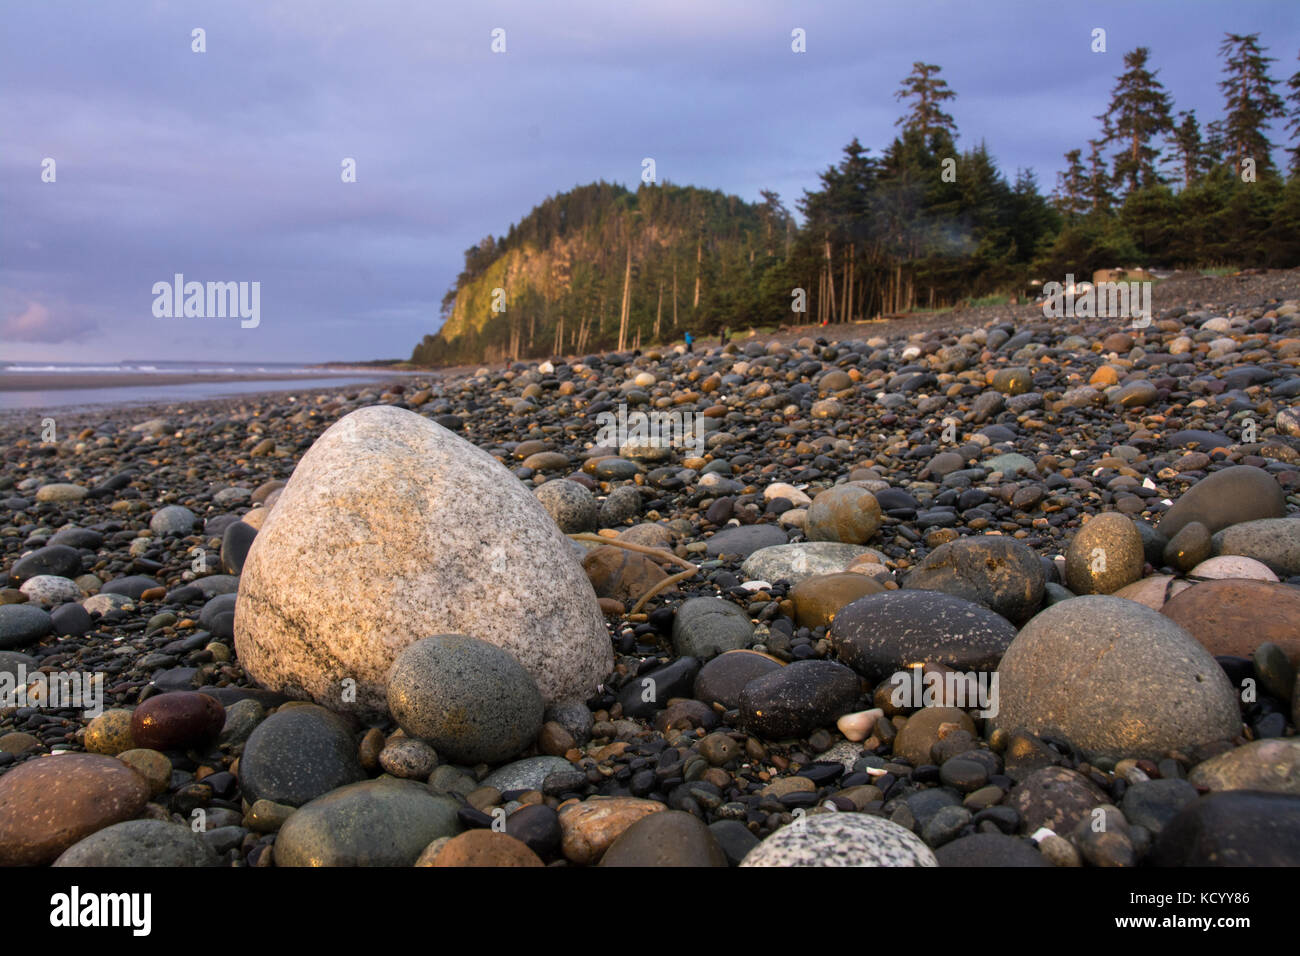 Agate Beach and Tow Hill,  Haida Gwaii, formerly known as Queen Charlotte Islands, British Columbia, Canada Stock Photo